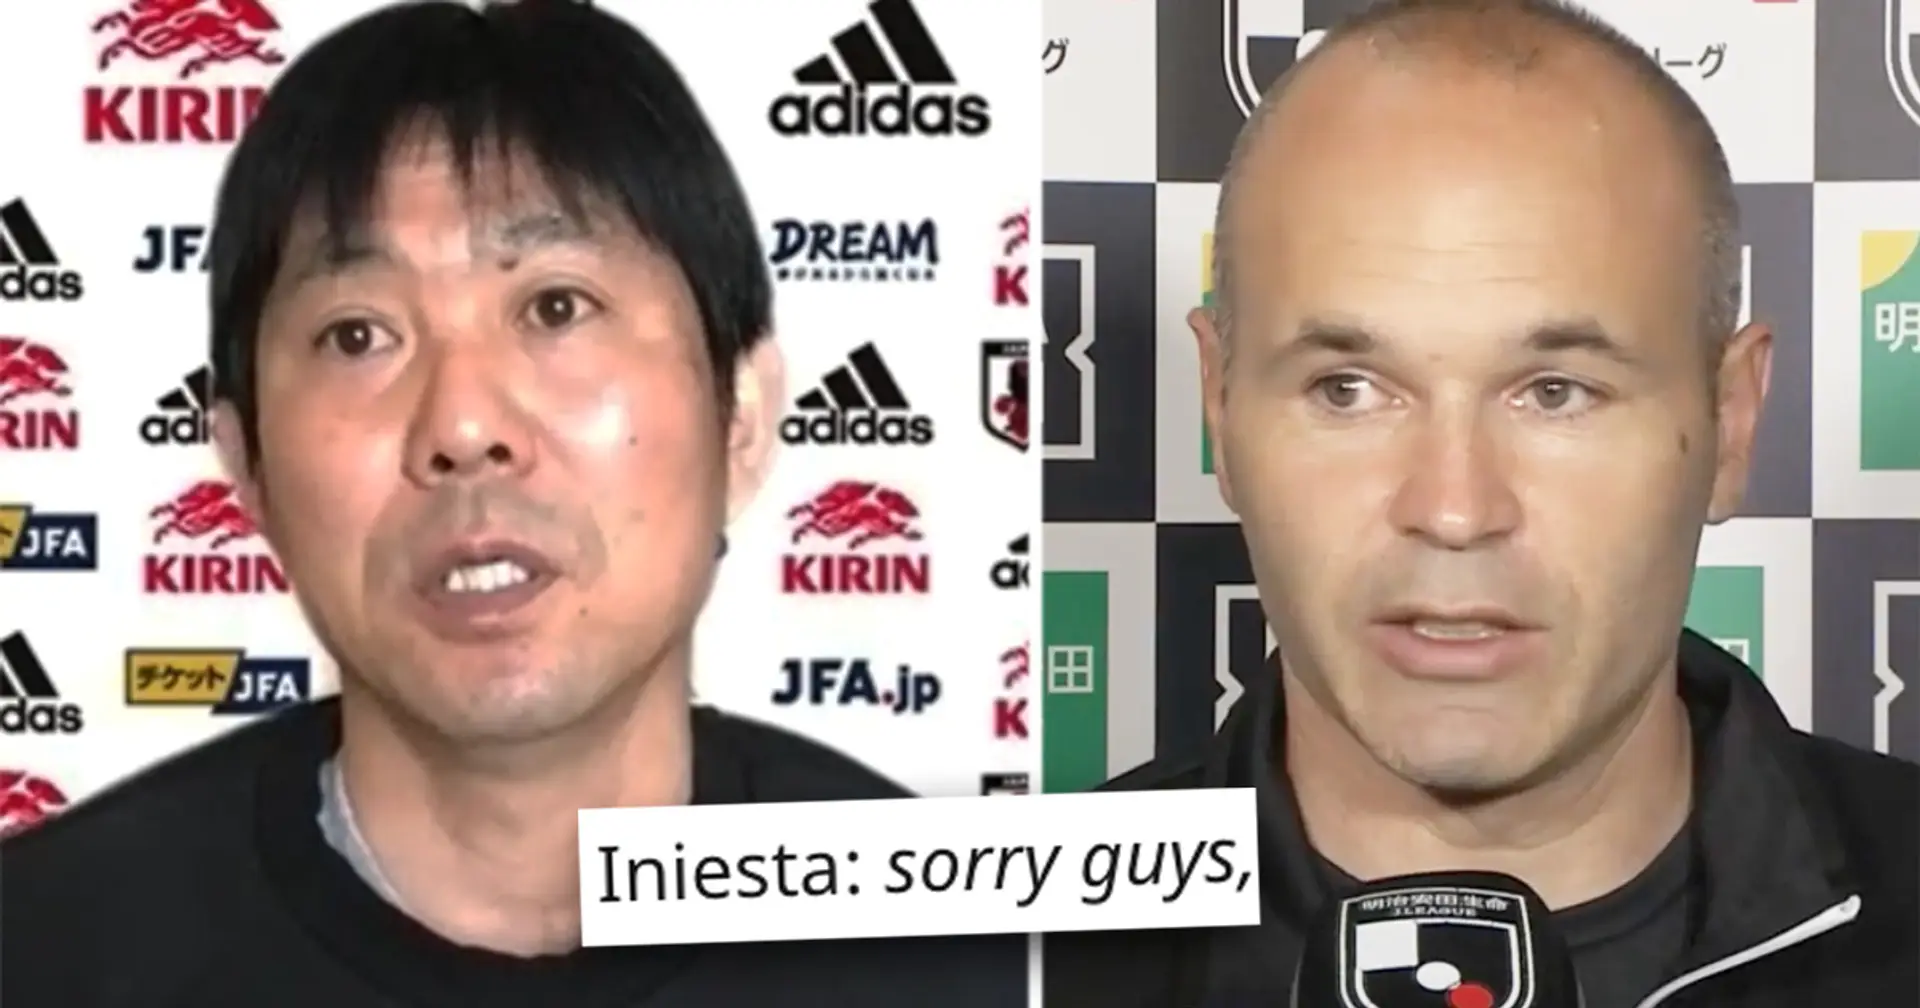 Japan coach says he will ask Iniesta how to beat Spain – fan suggests Andres' reply